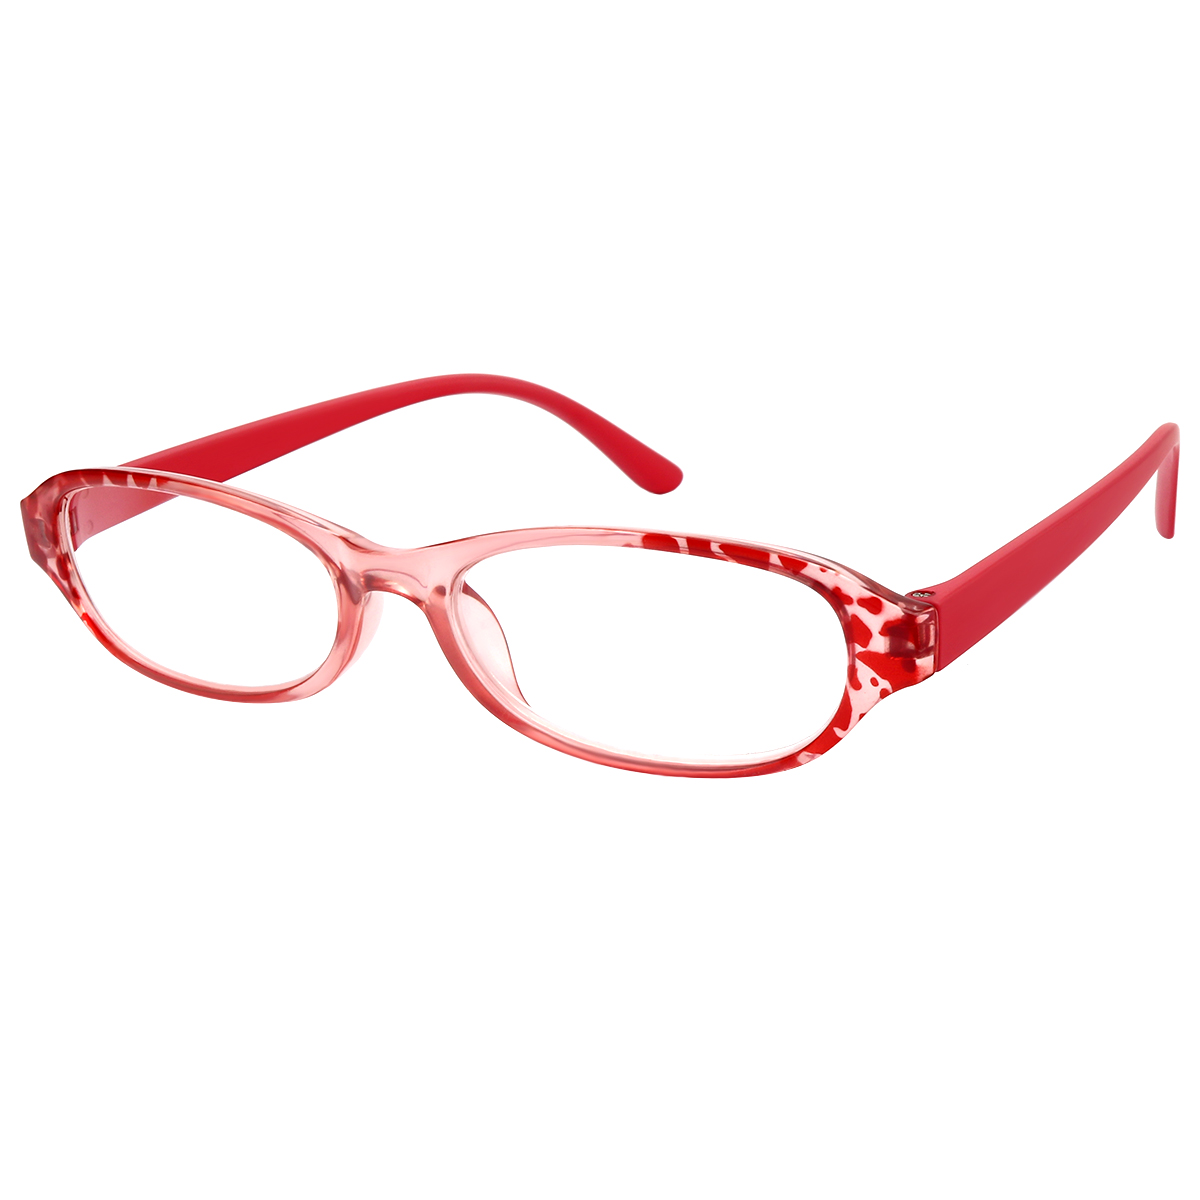 Palmetto - Oval Red Reading Glasses for Women